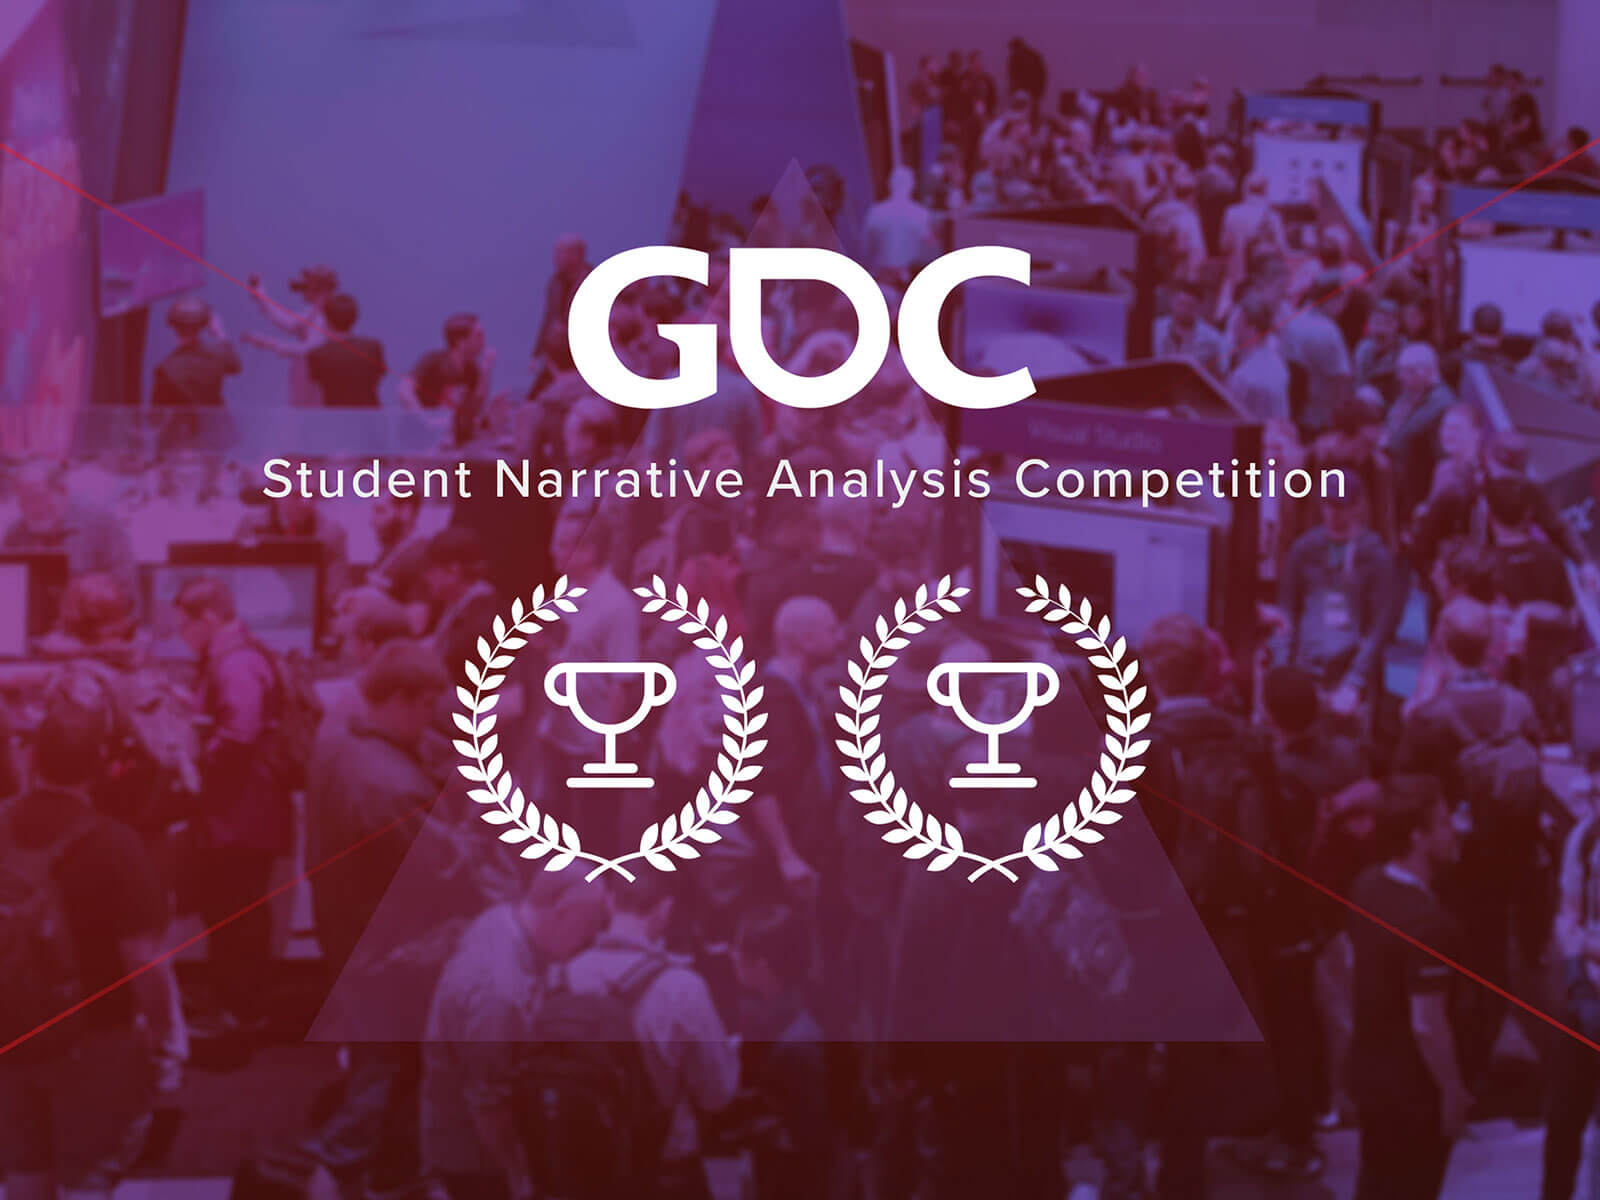 Two award graphics imposed on a purple background with the GDC logo in white above it